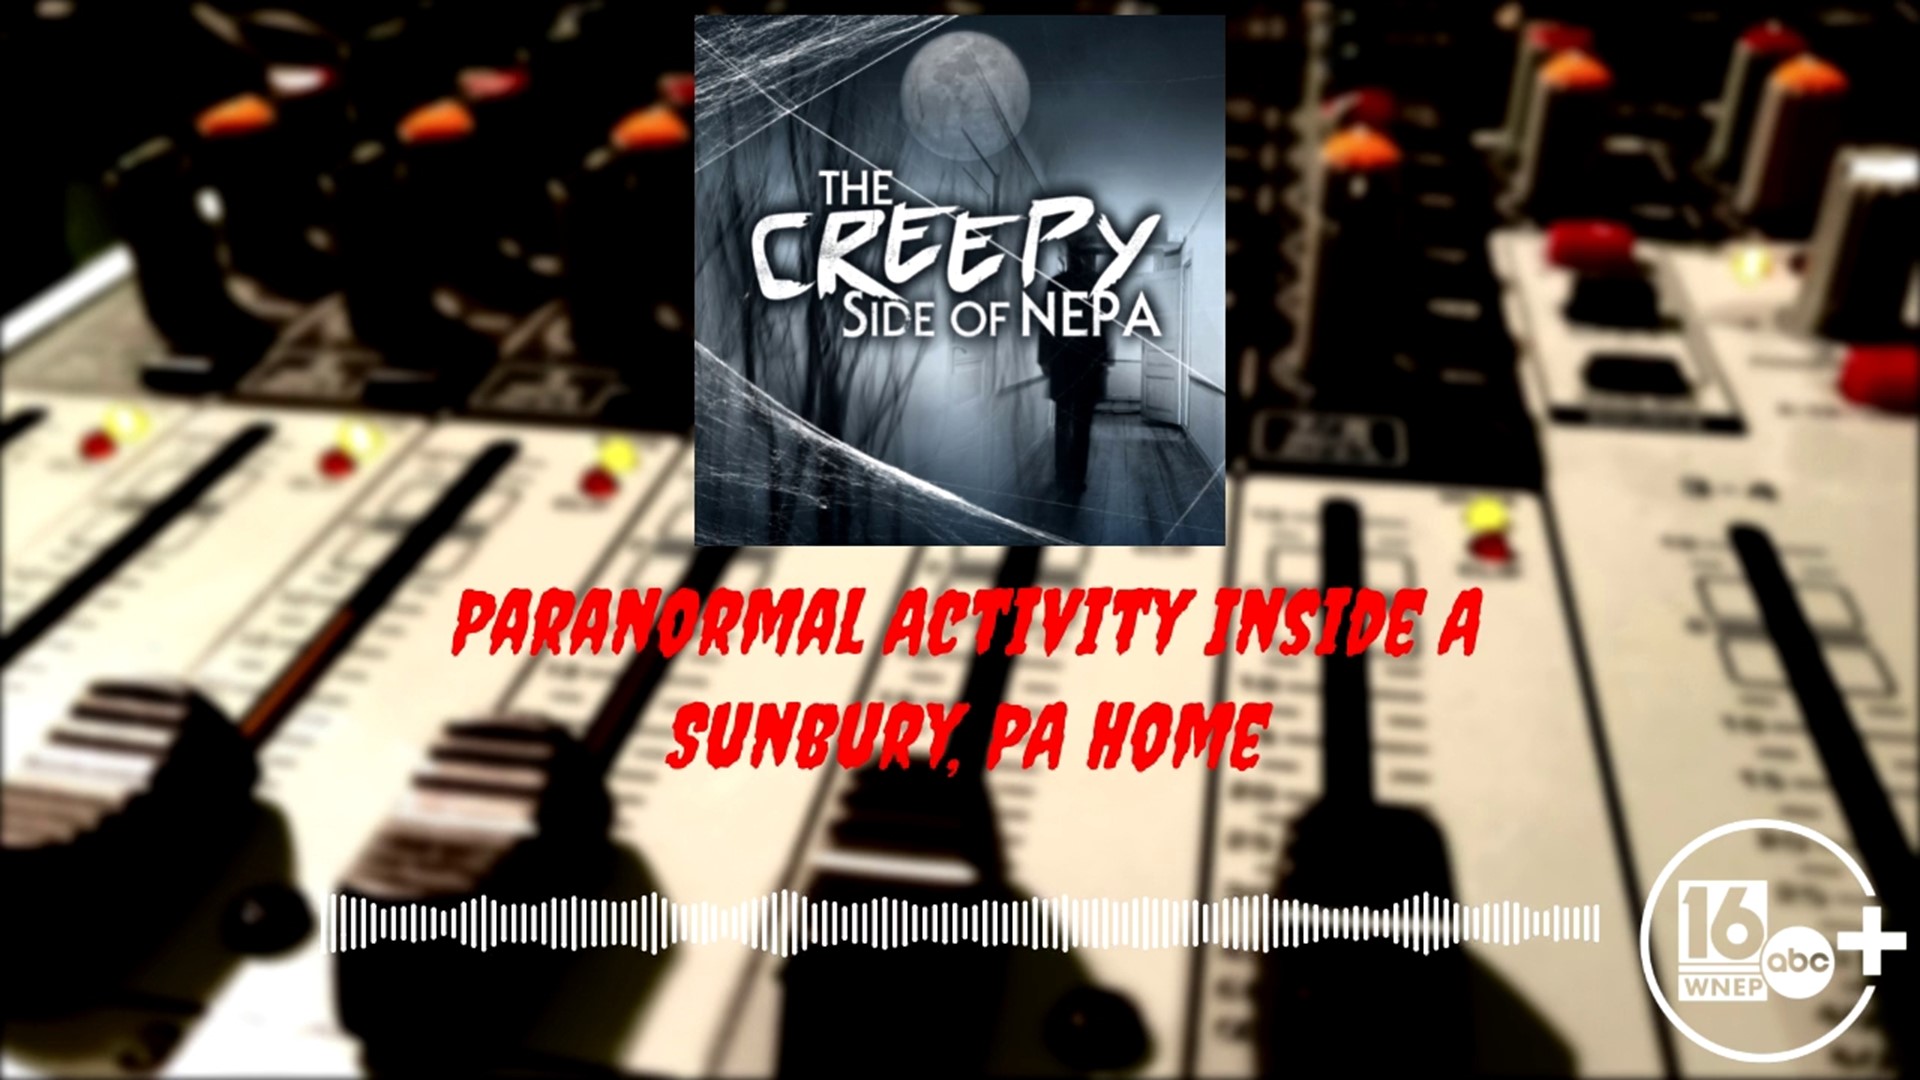 On this episode of The Creepy Side of NEPA, listener Diane from Sunbury shares with us a creepy paranormal experience she had inside her former home.